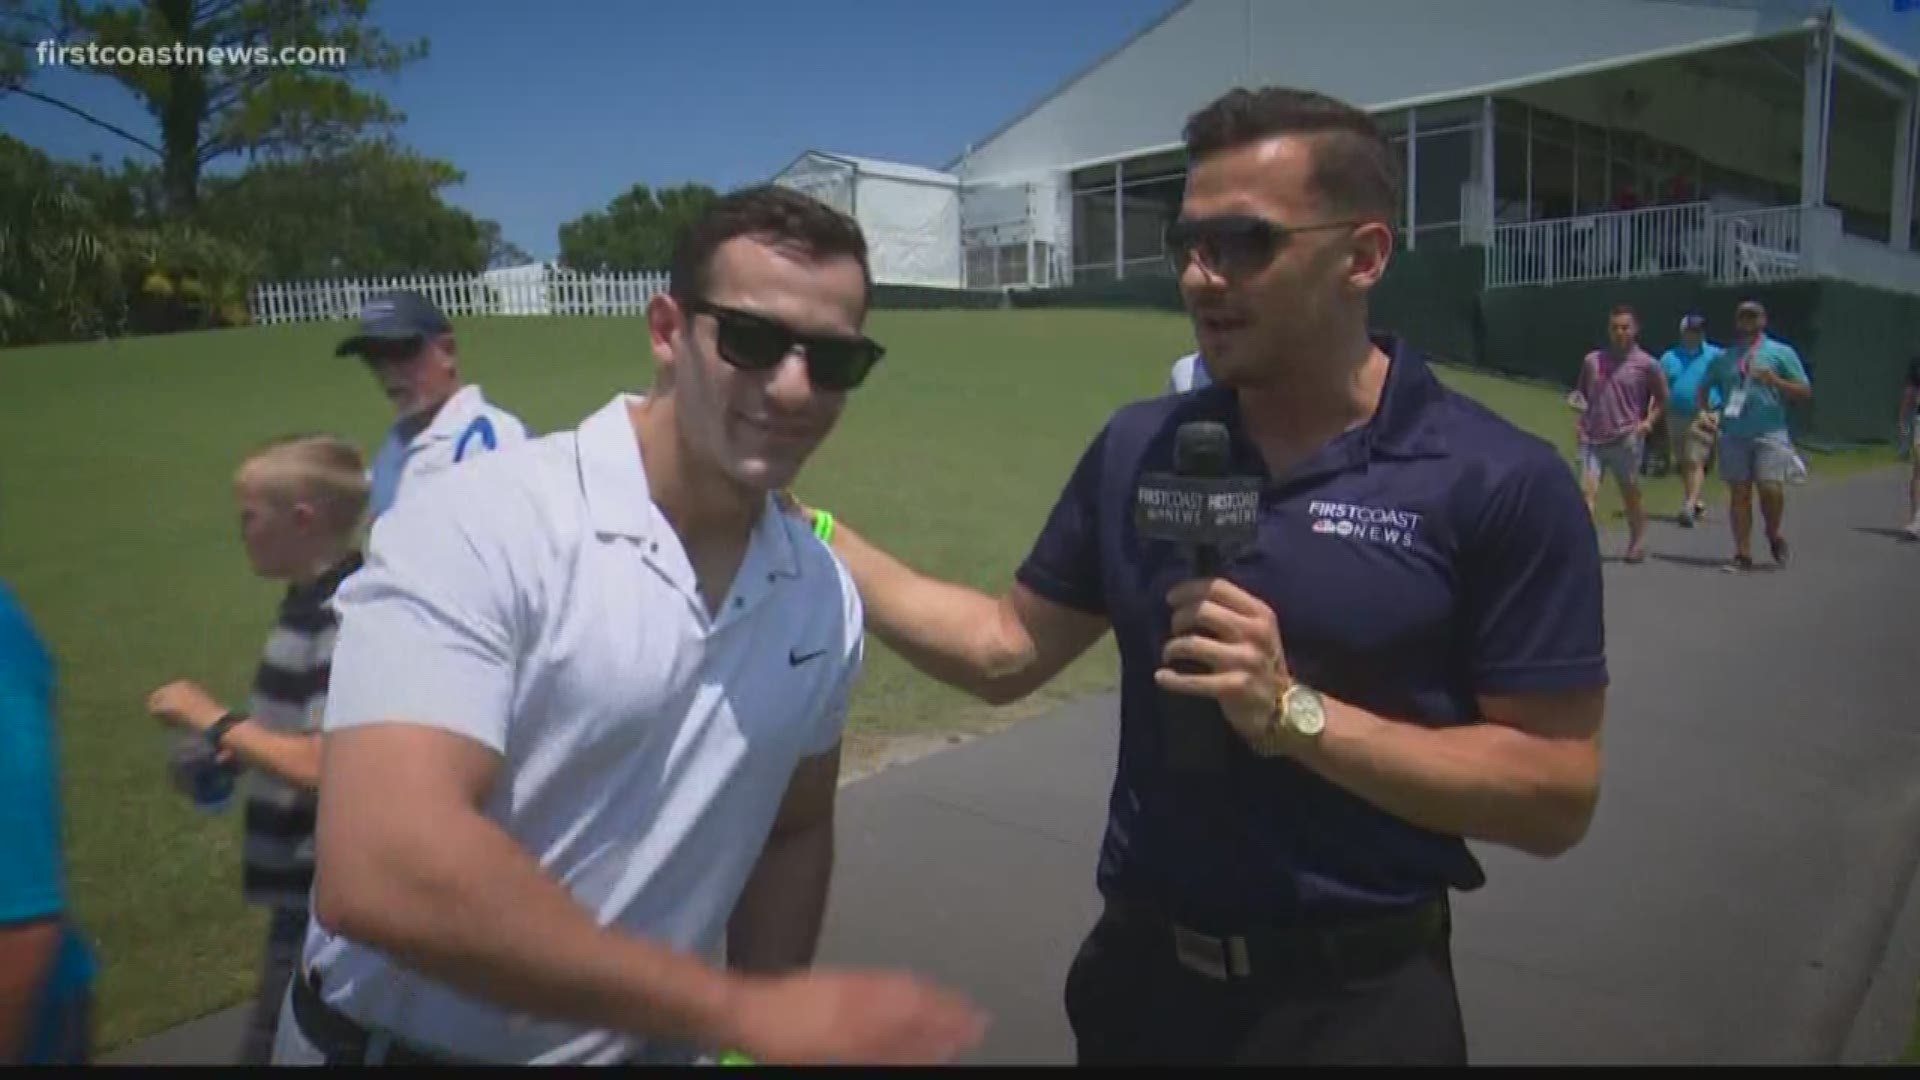 FCN's Brian Chojnacki meets up with a celebrity reporter to get the "vibe" of The Players Championship.